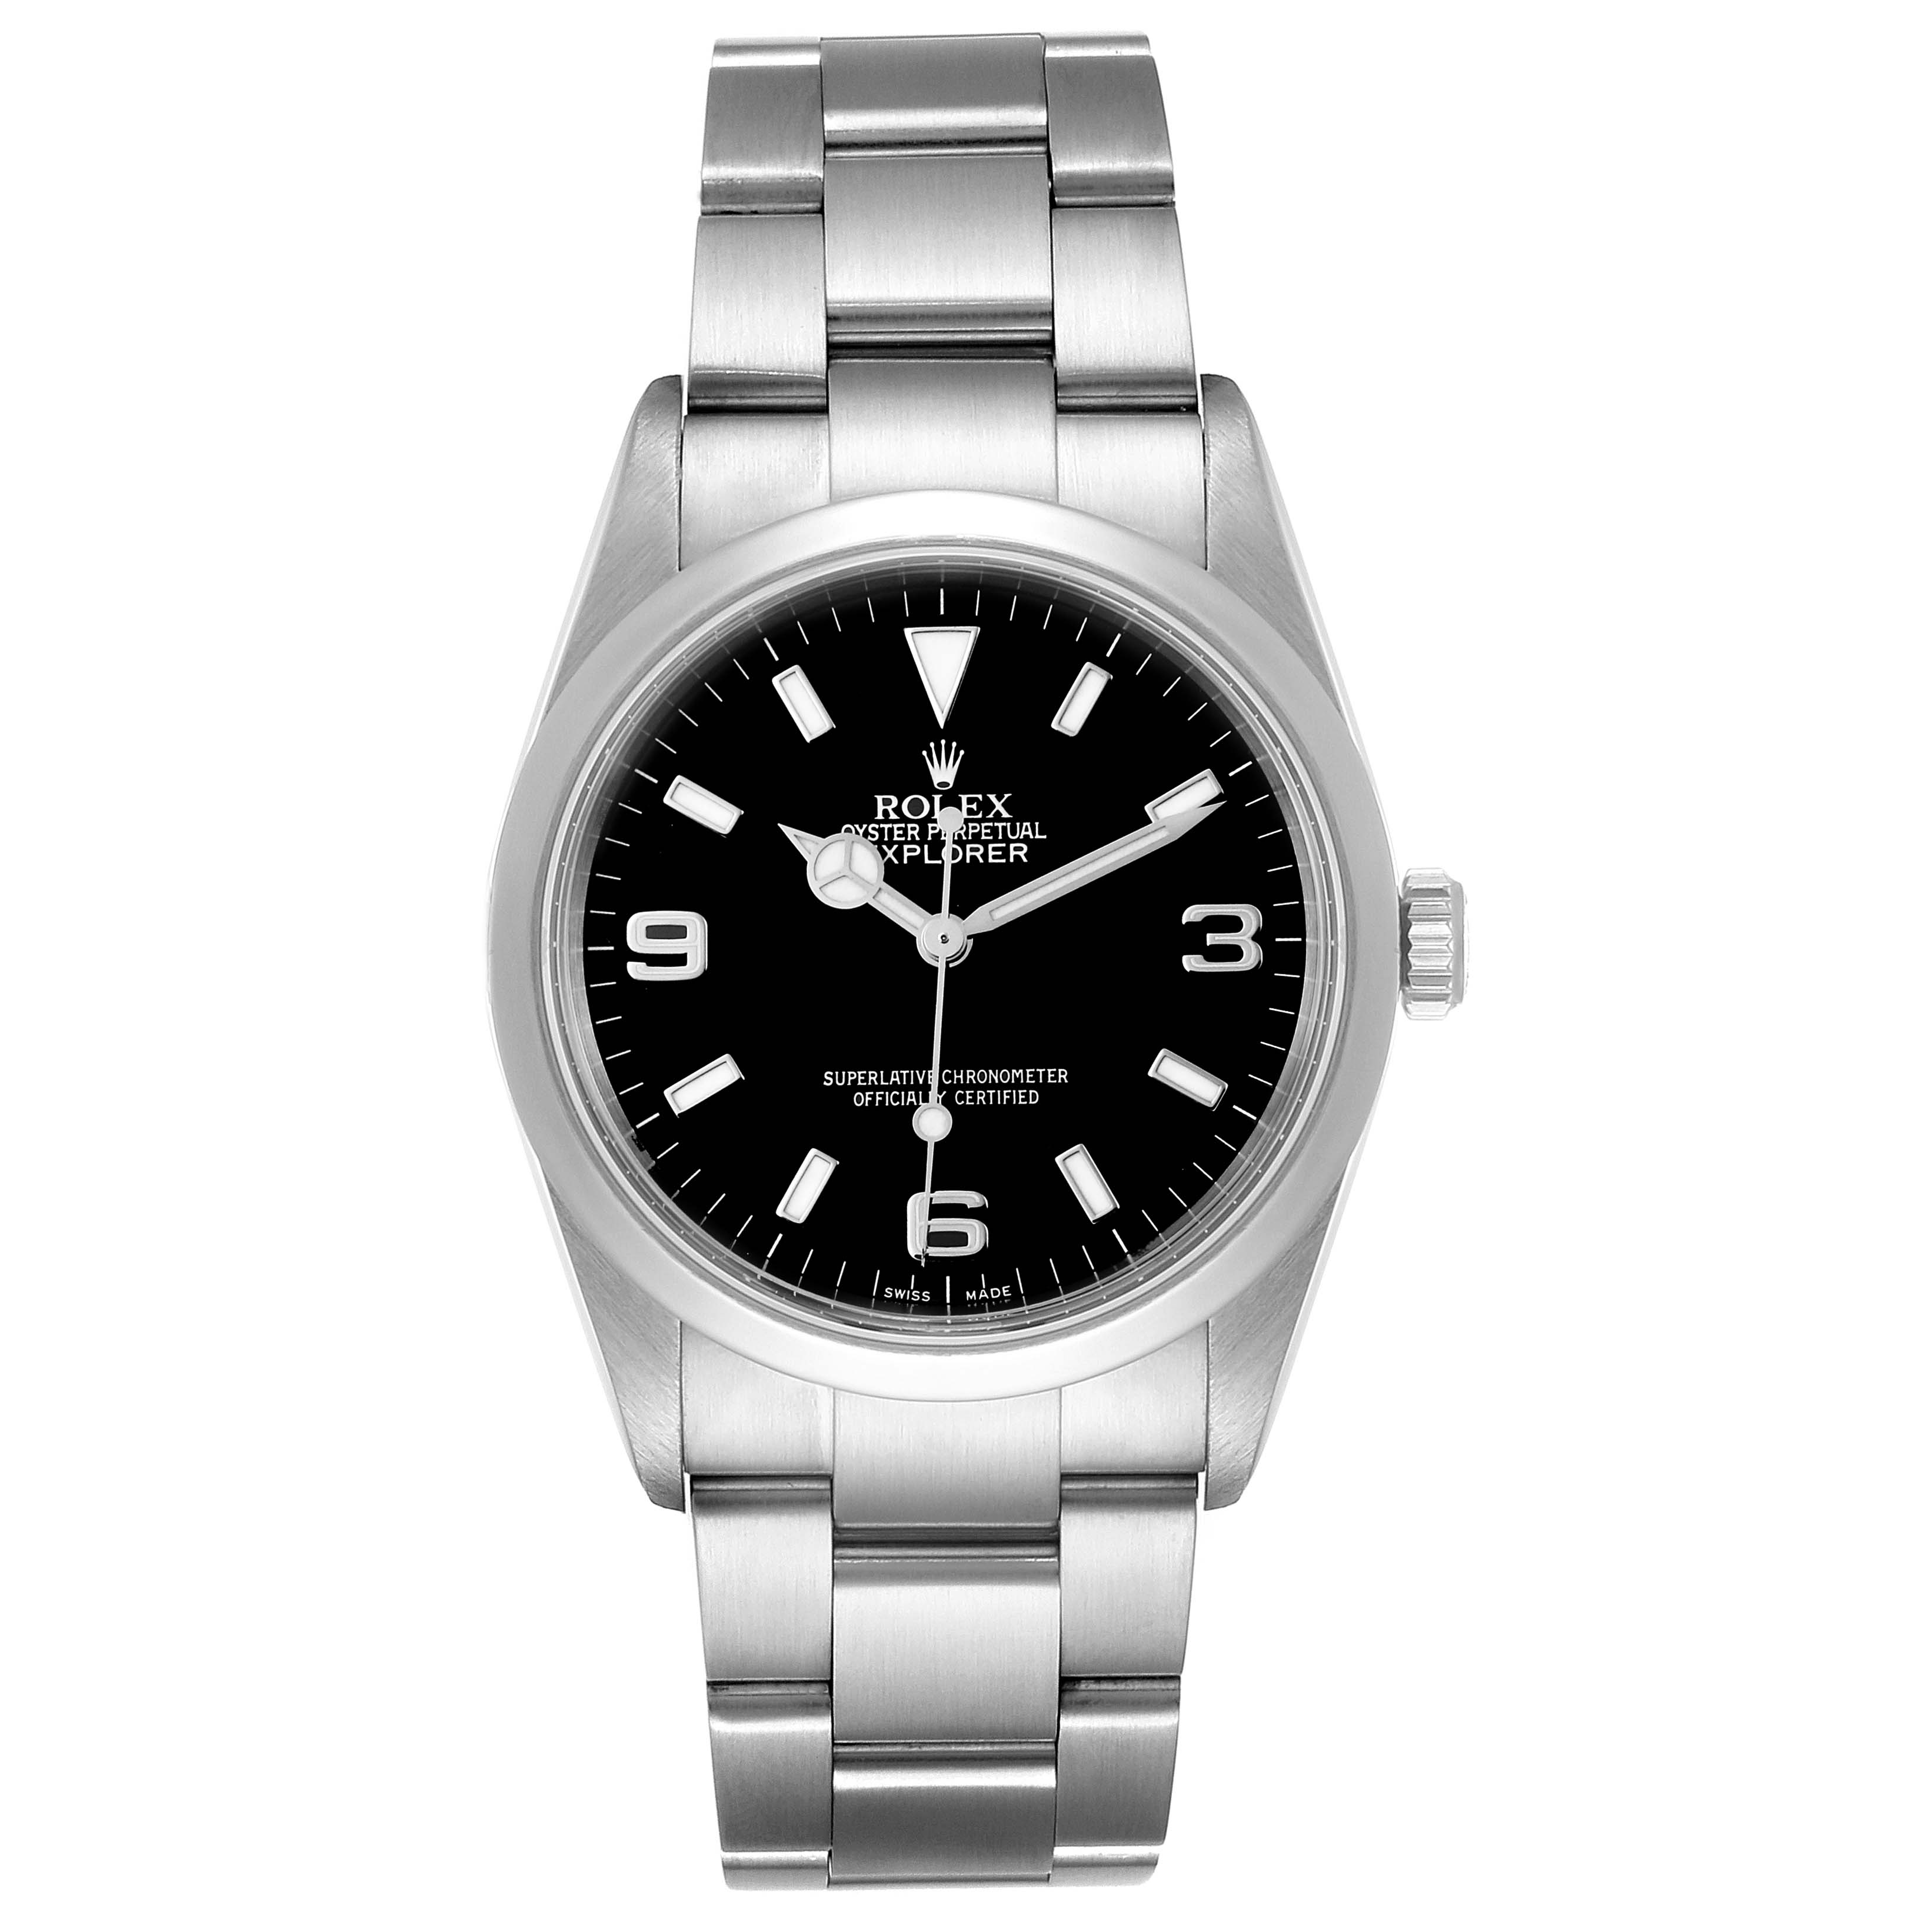 Rolex Explorer I Black Dial Stainless Steel Mens Watch 114270 Box ...